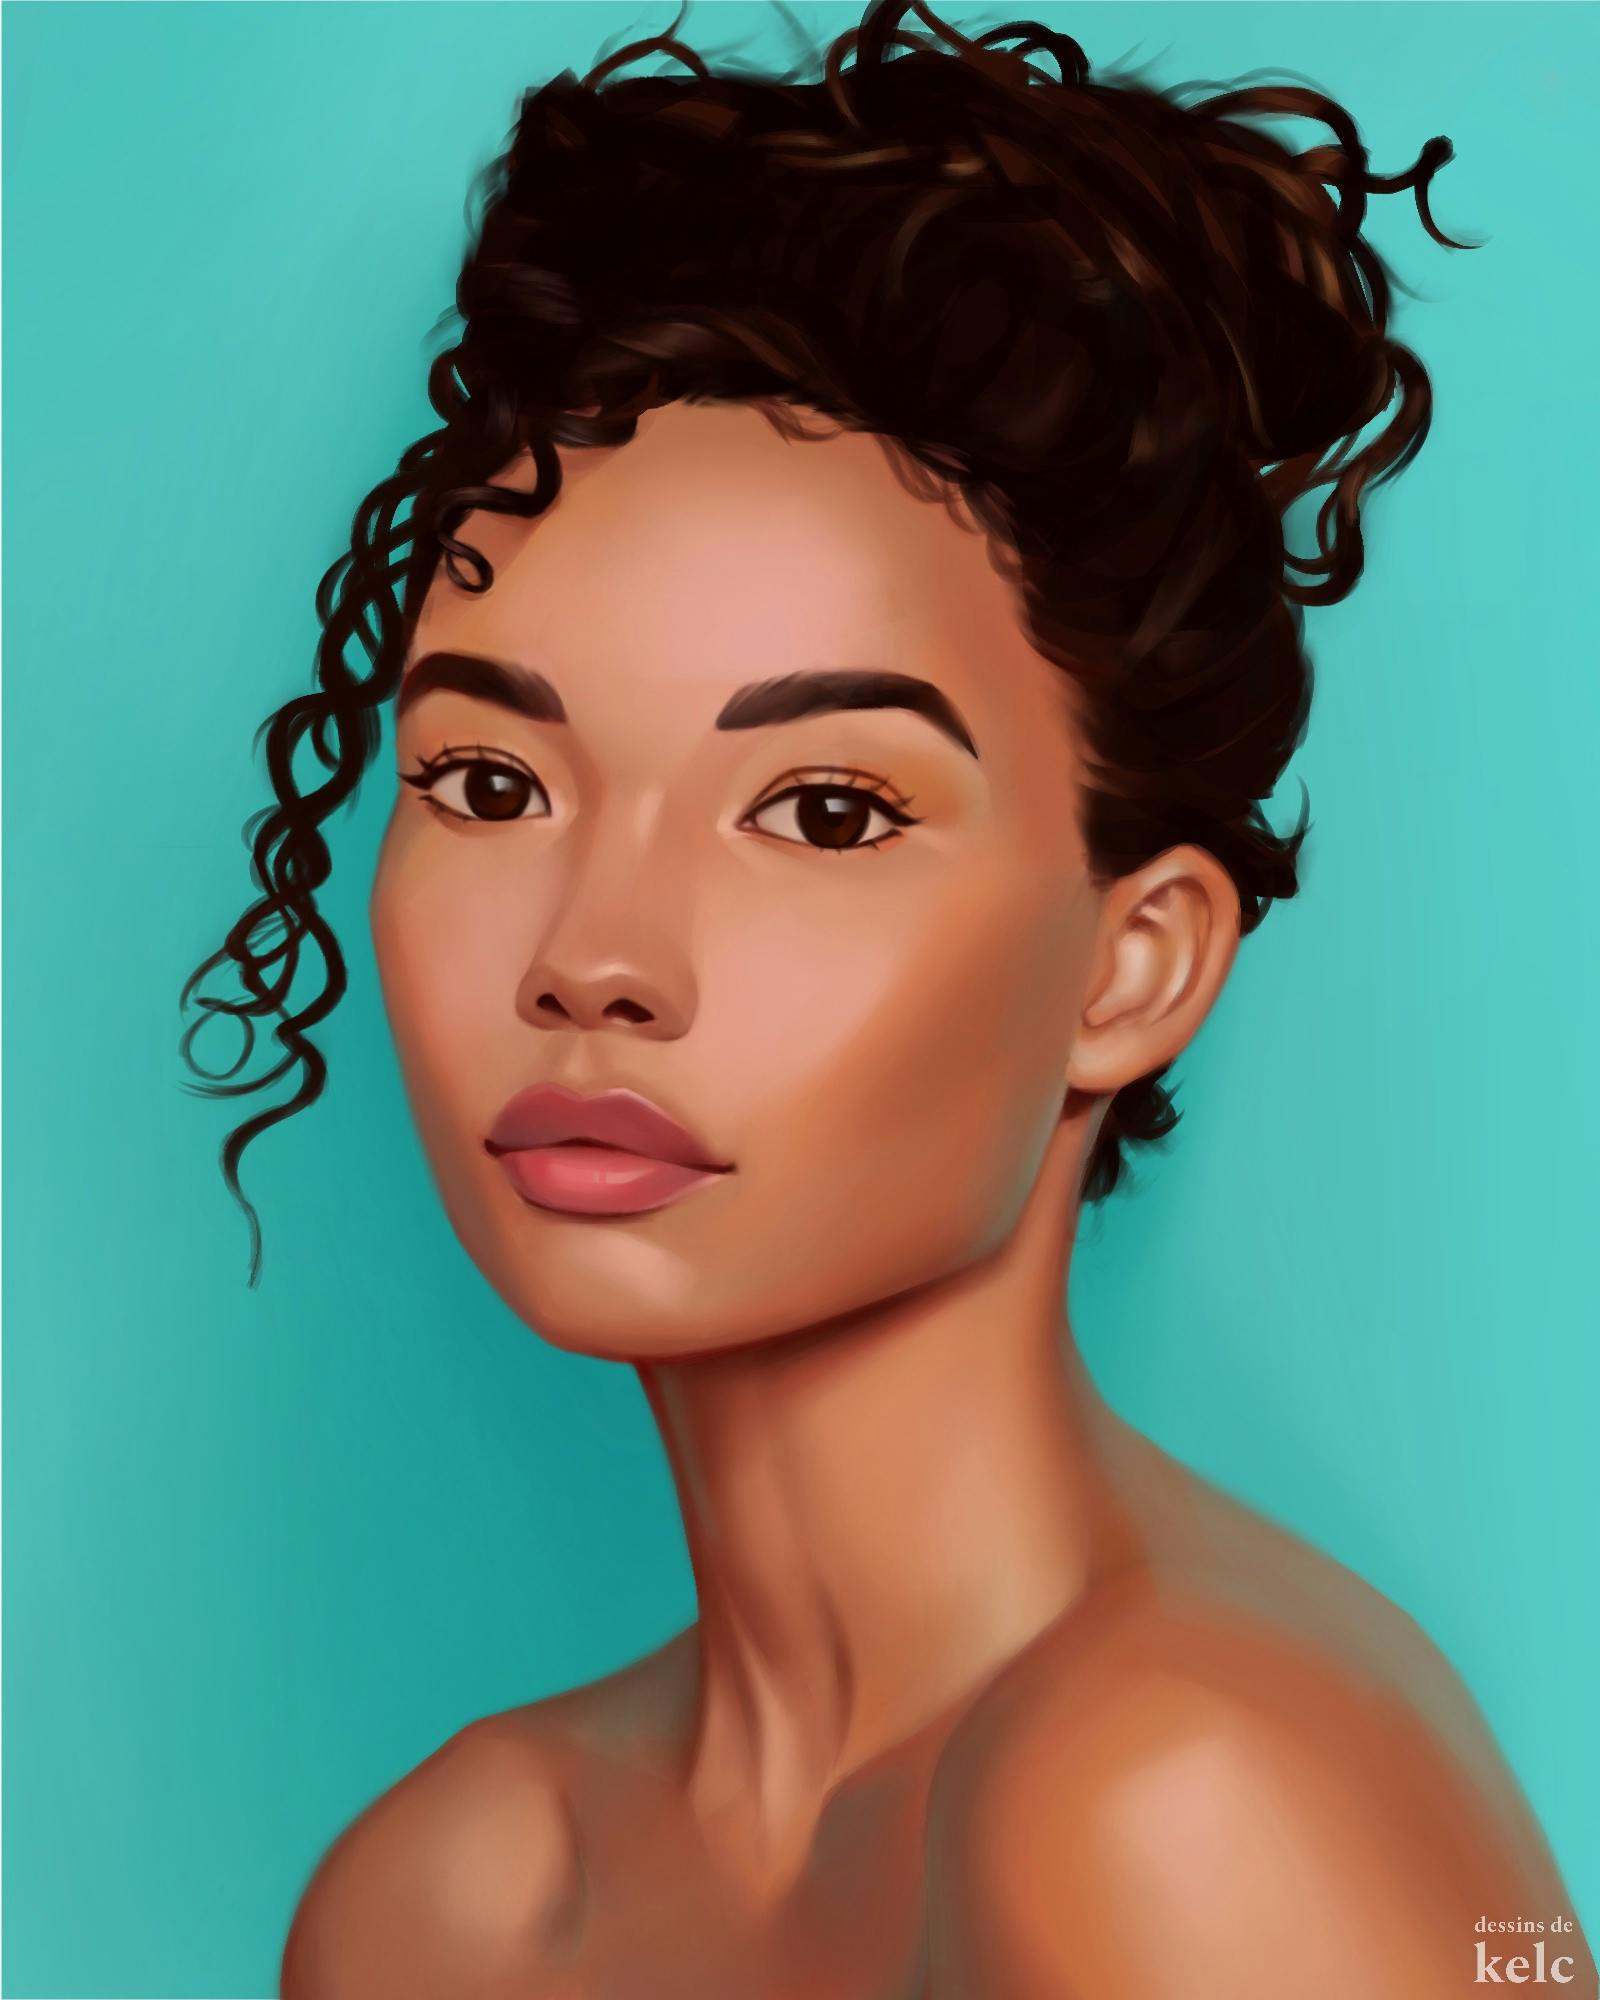 Digital painting of a light-skinned woman with curly hair in a bun